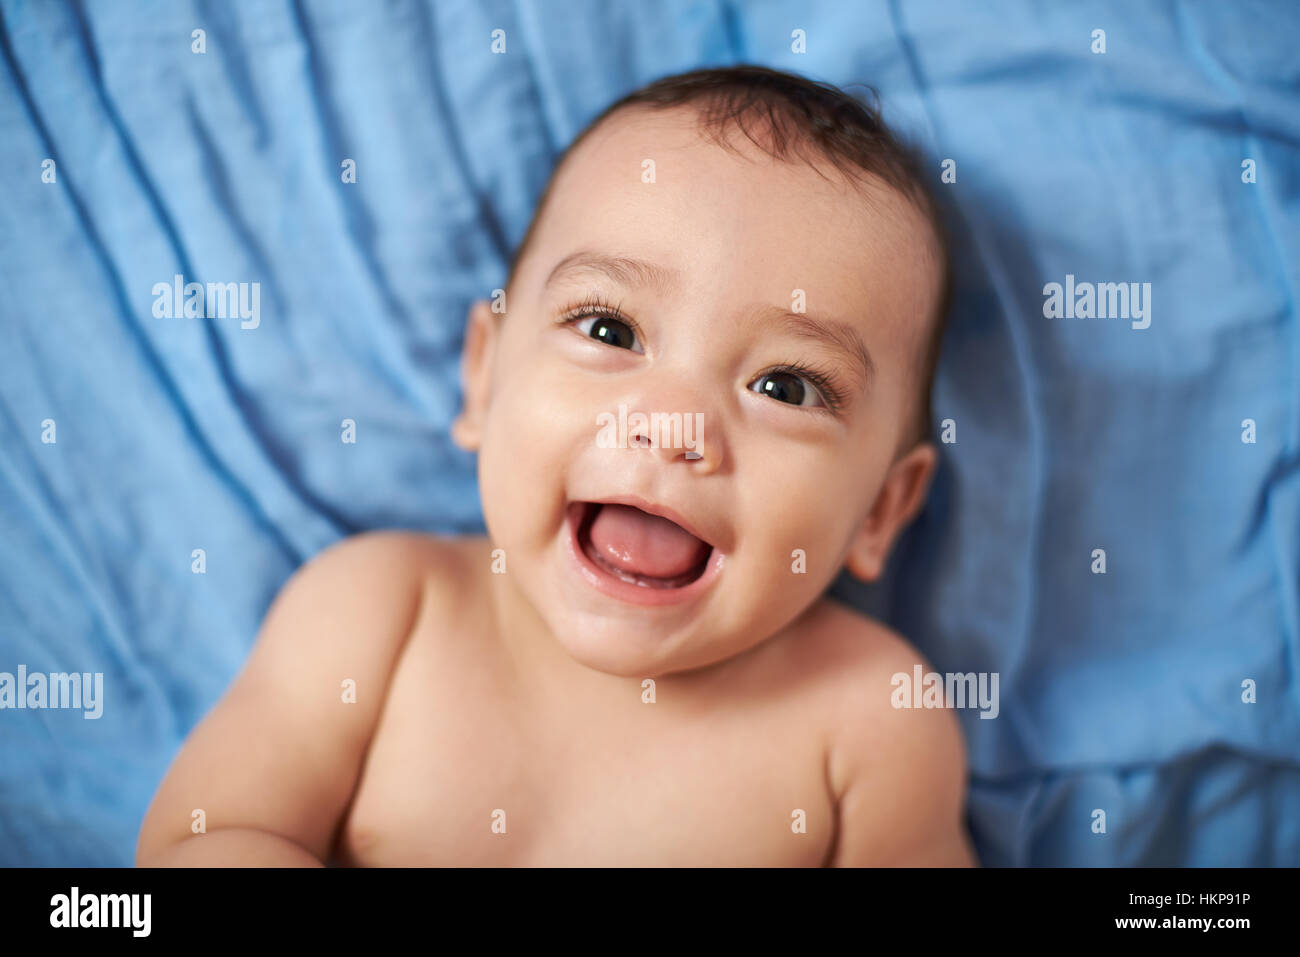 Smiling baby laying on bed couverture bleue close up Banque D'Images